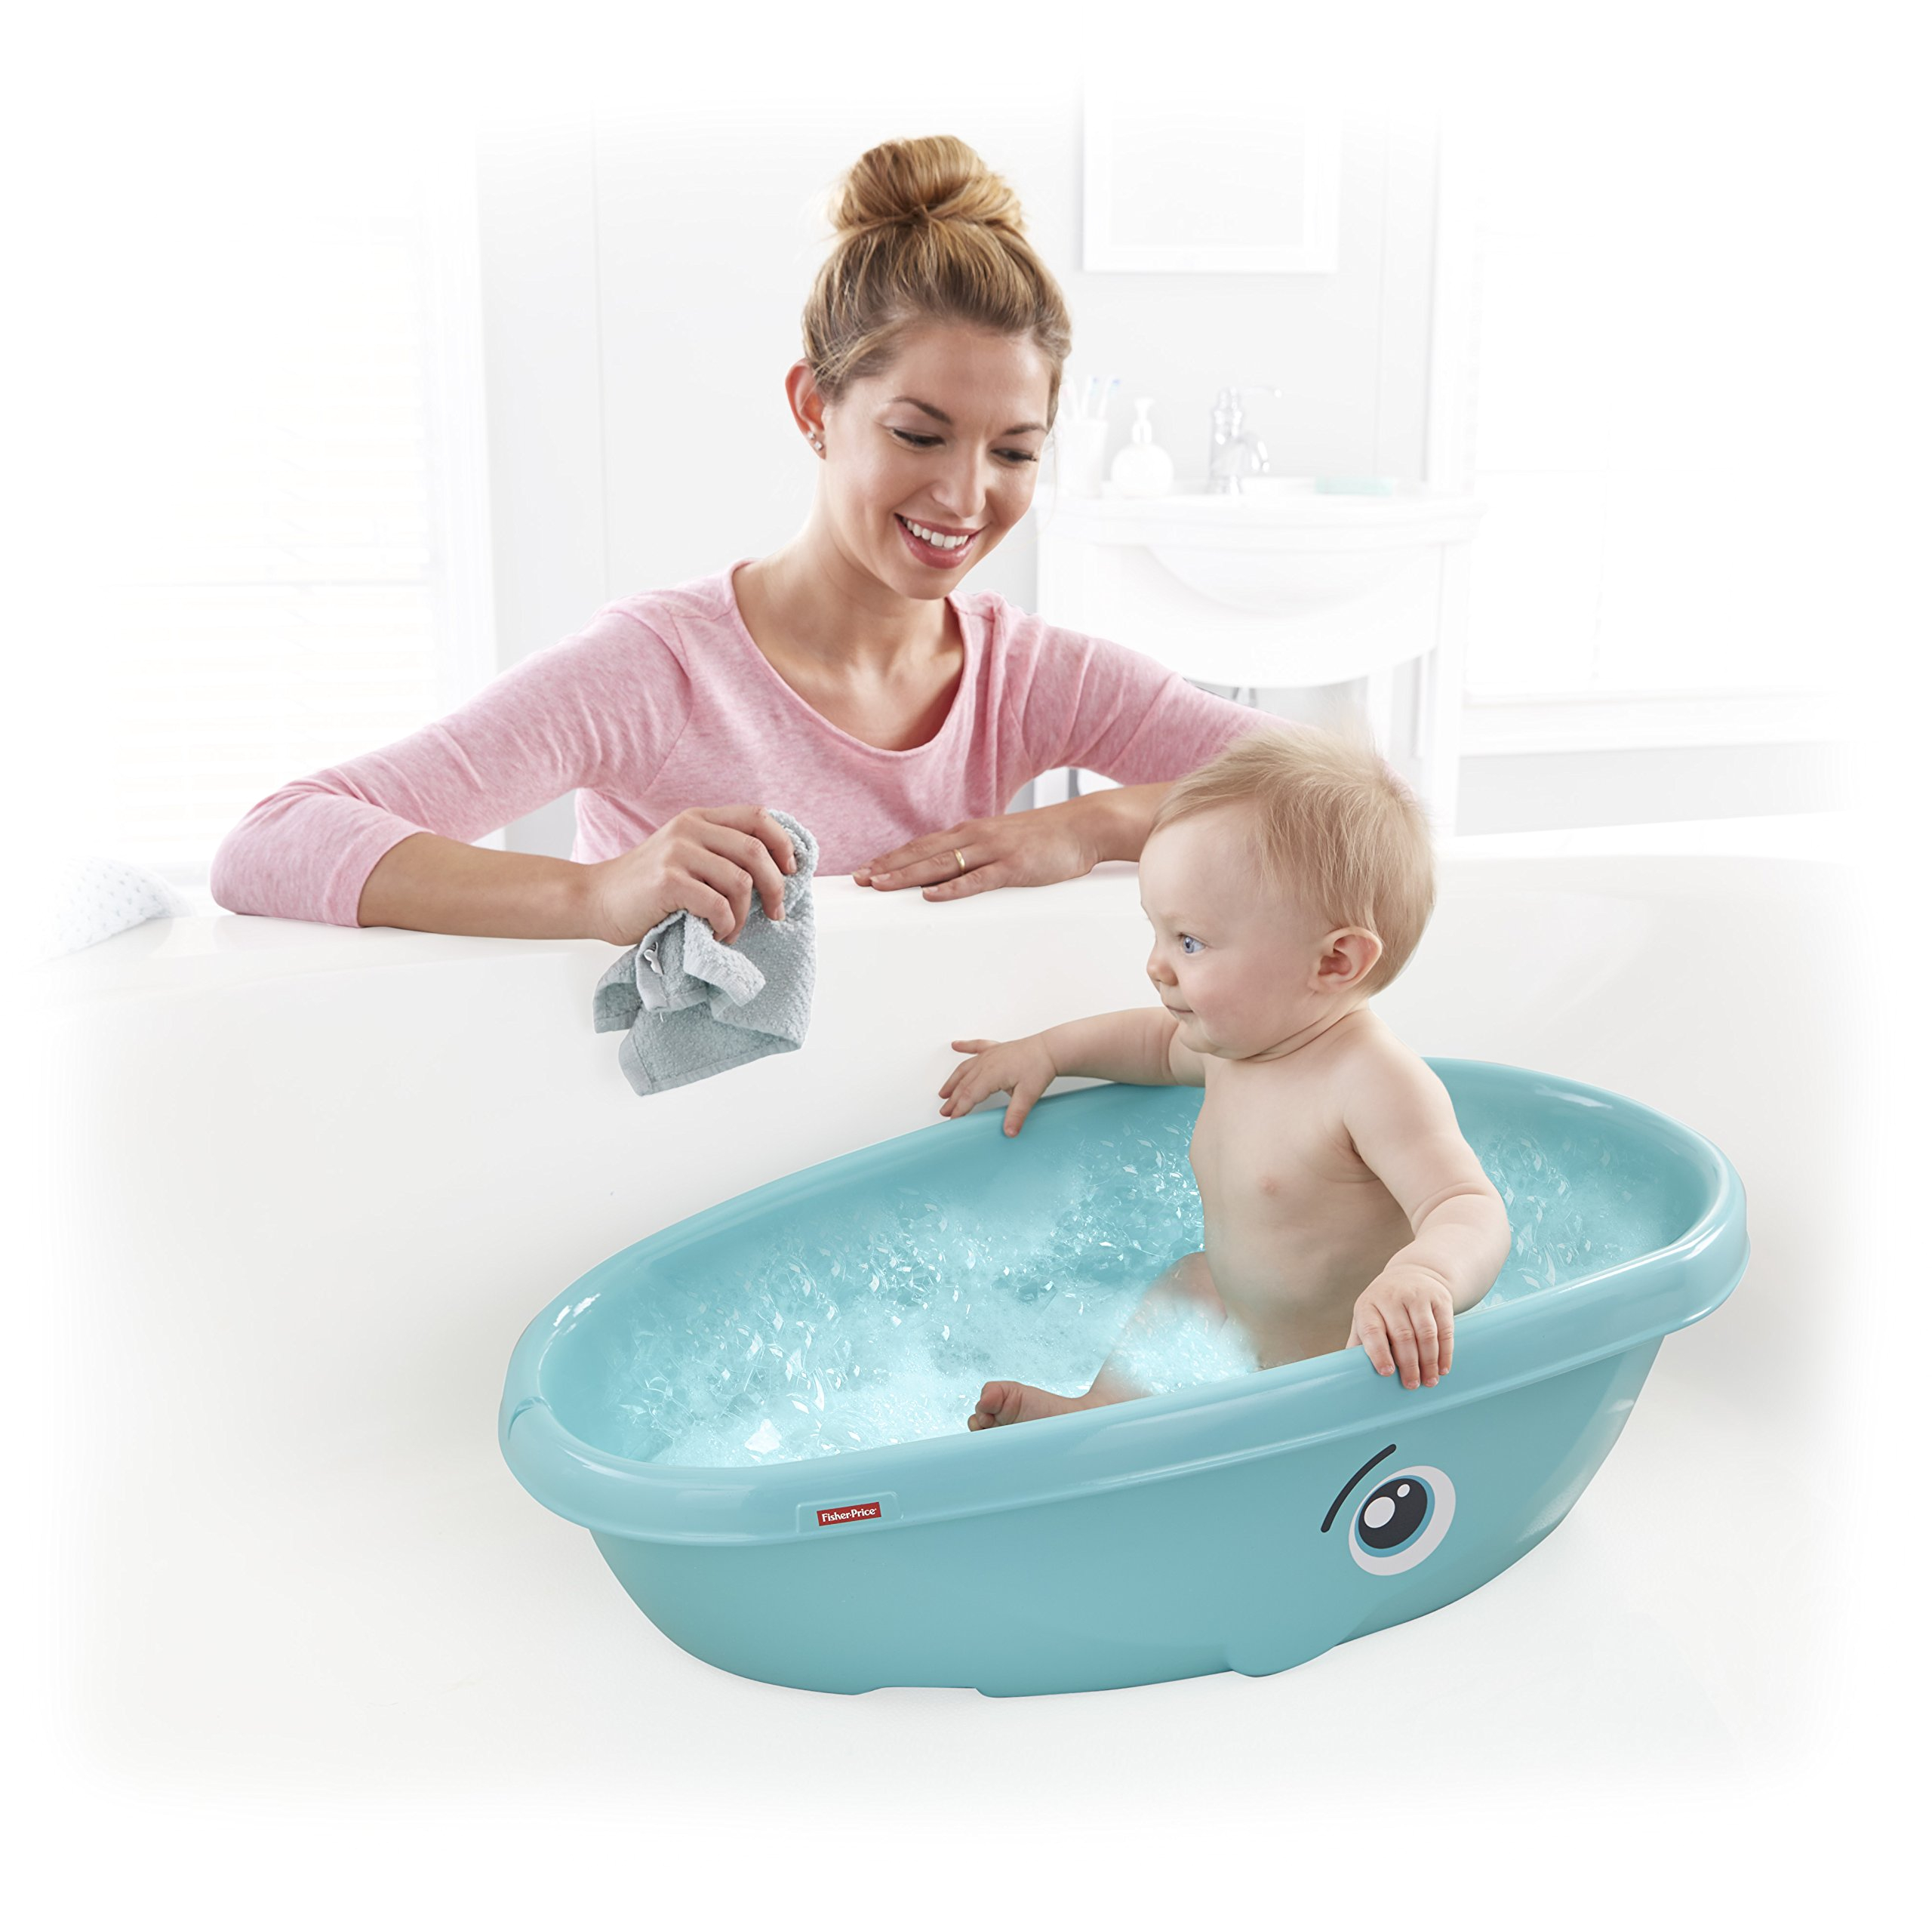 Prices for Baby Bathtubs Fisher Price top Quality Bath Tub Best Baby Seat Shower